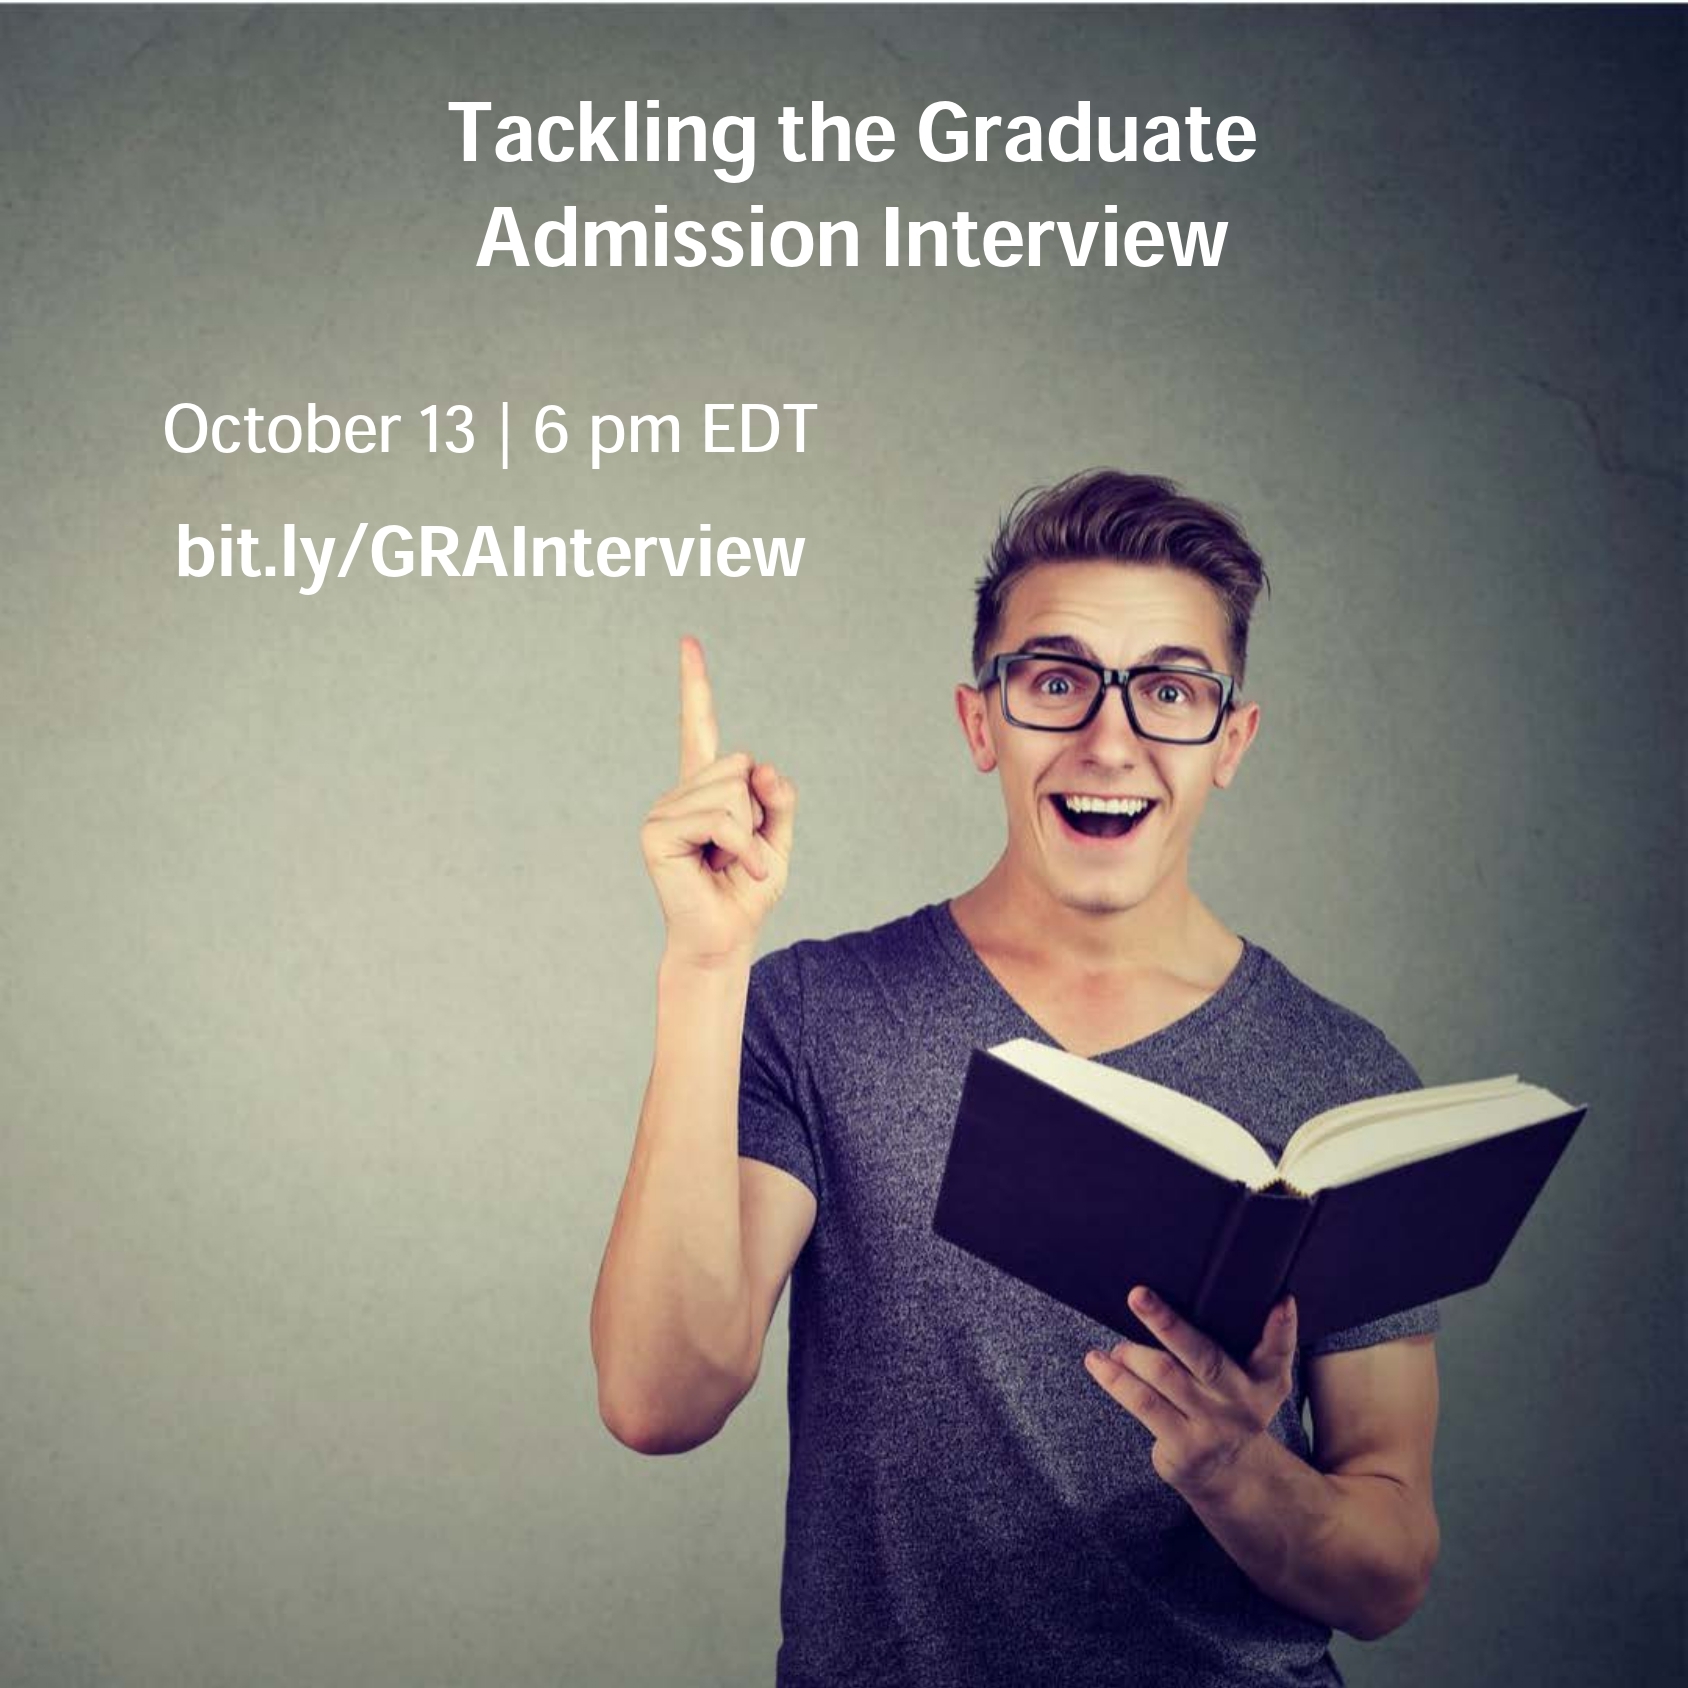 Man with a book points to the text: "Tackling the Graduate Admission Interview, October 13 6 PM EDT, bit.ly/GRAInterview